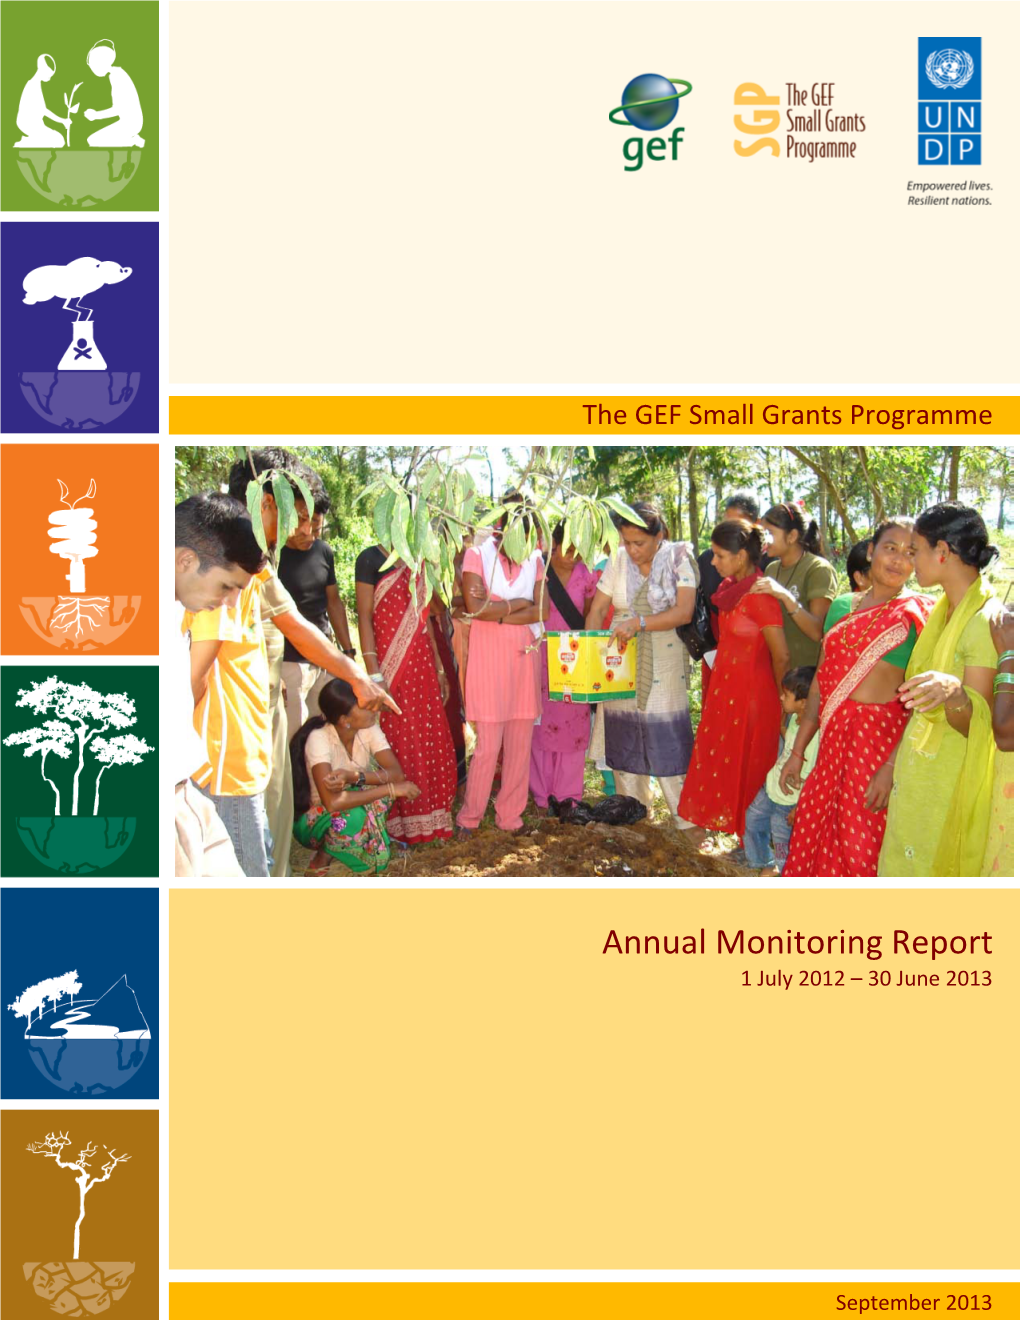 Small Grants Programme Annual Monitoring Report January 2012